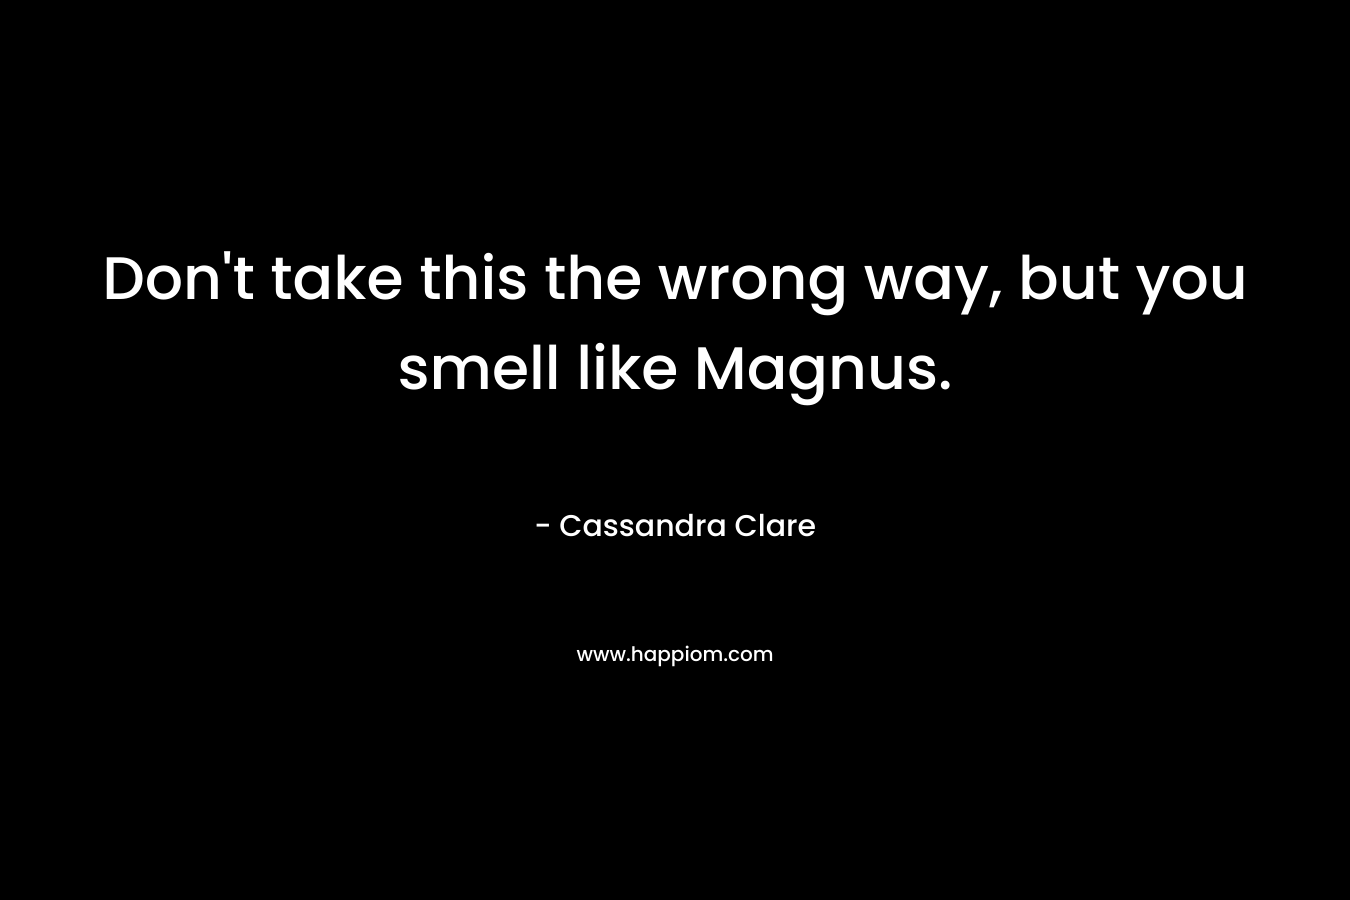 Don’t take this the wrong way, but you smell like Magnus. – Cassandra Clare